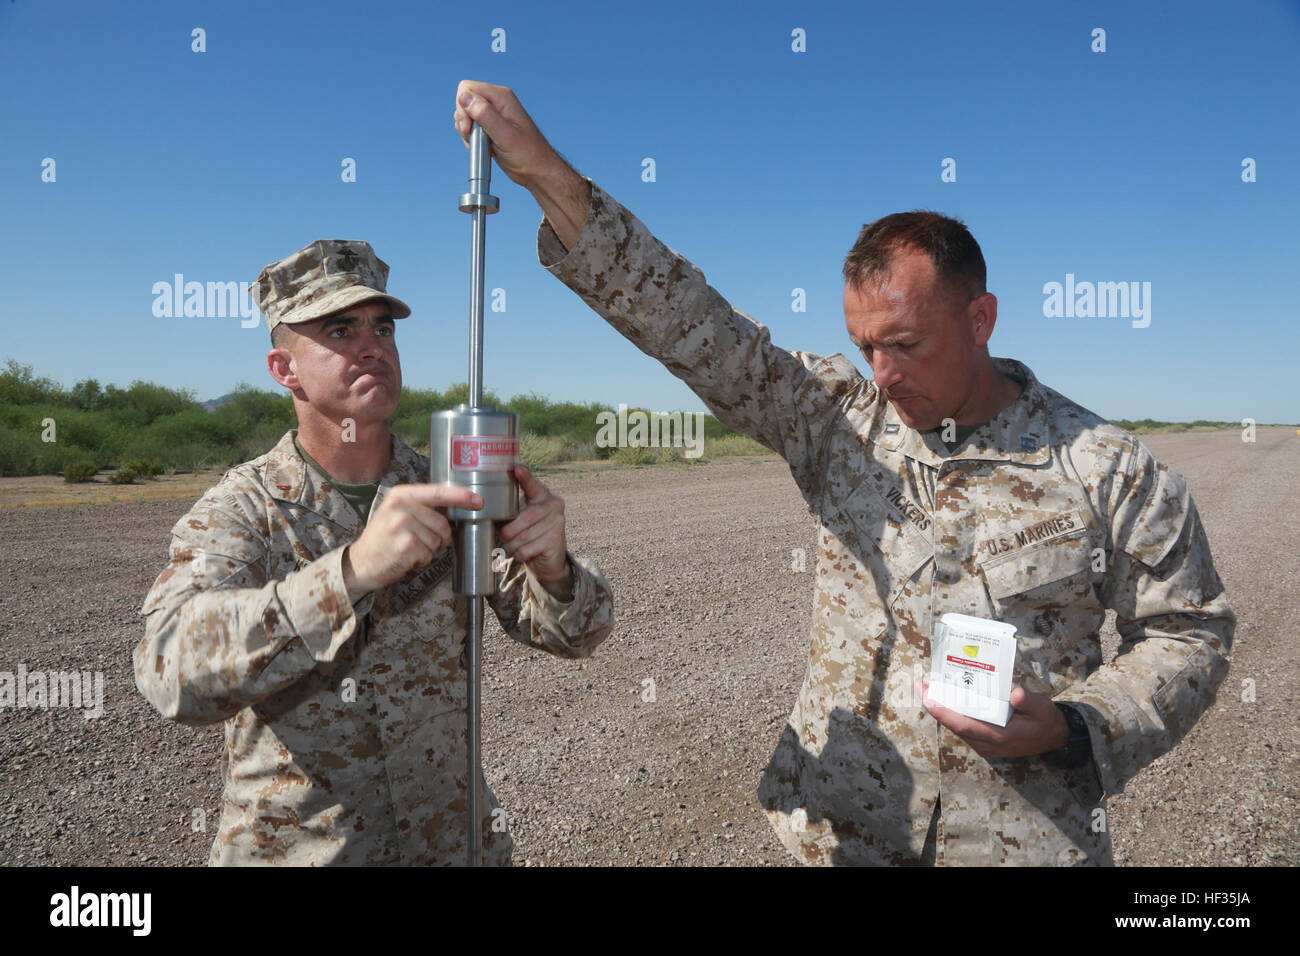 U.S. Marine Corps Chief Warrant Officer 3 Timothy Killebrew, a airfield emergency services officer assigned to Marine Wing Headquarter Squadron One, 1st Marine Aircraft Wing, and Capt. Shane Vickers, the commanding officer of Marine Wing Support Detachment 24, measures the soil subsurface with a dynamic cone penetrometer while attending the Weapons and Tactics Instructor (WTI) Course at Marine Corps Air Station Yuma, March 31, 2015. WTI is a seven week training event hosted by Marine Aviation Weapons and Tactics Squadron One (MAWTS-1) cadre. MAWTS-1 provides standardized tactical training and  Stock Photo